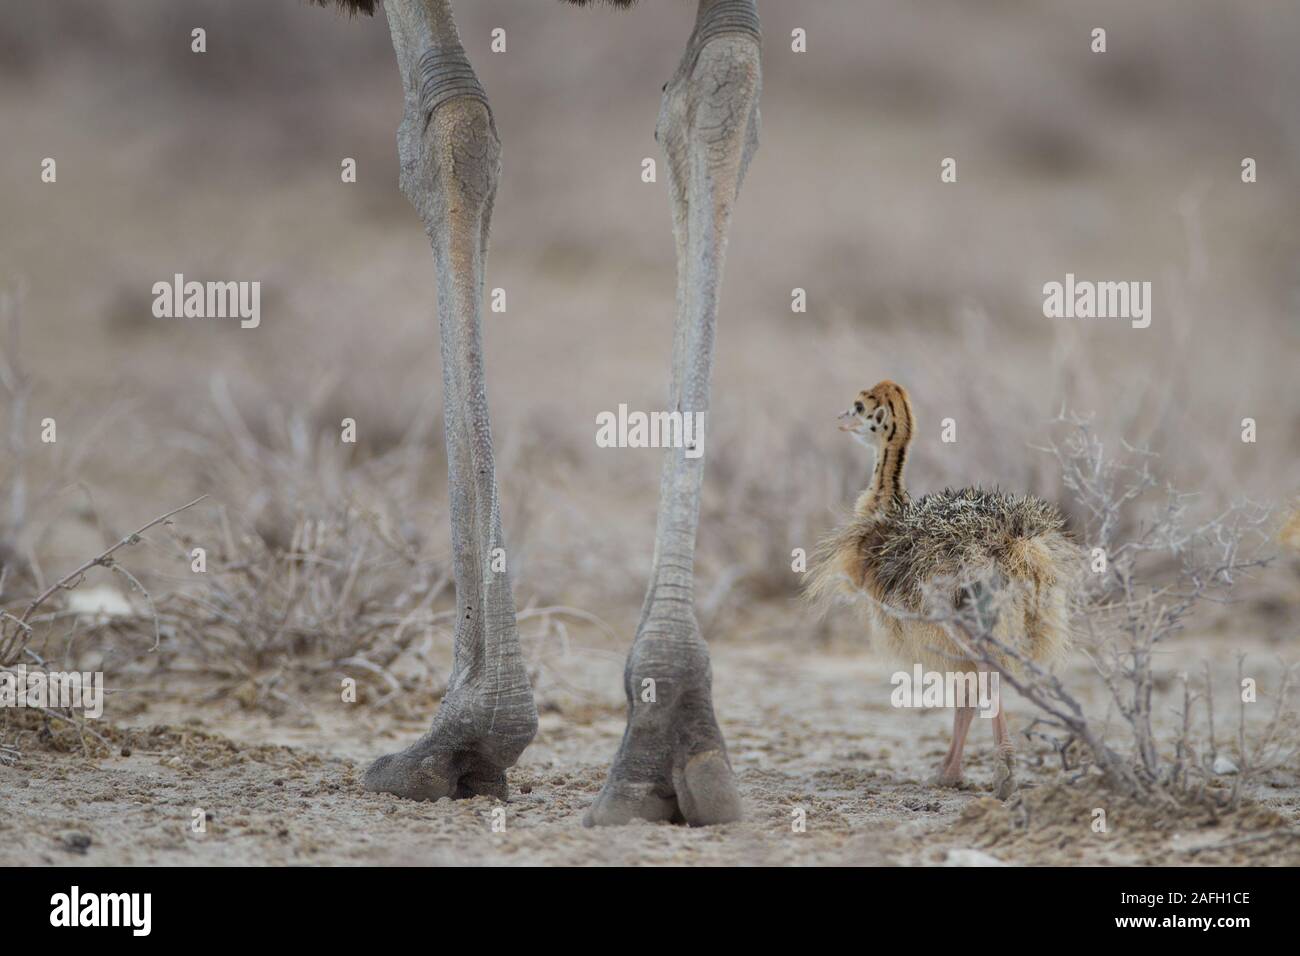 Baby ostrich walking near its mother near dried out plants Stock Photo